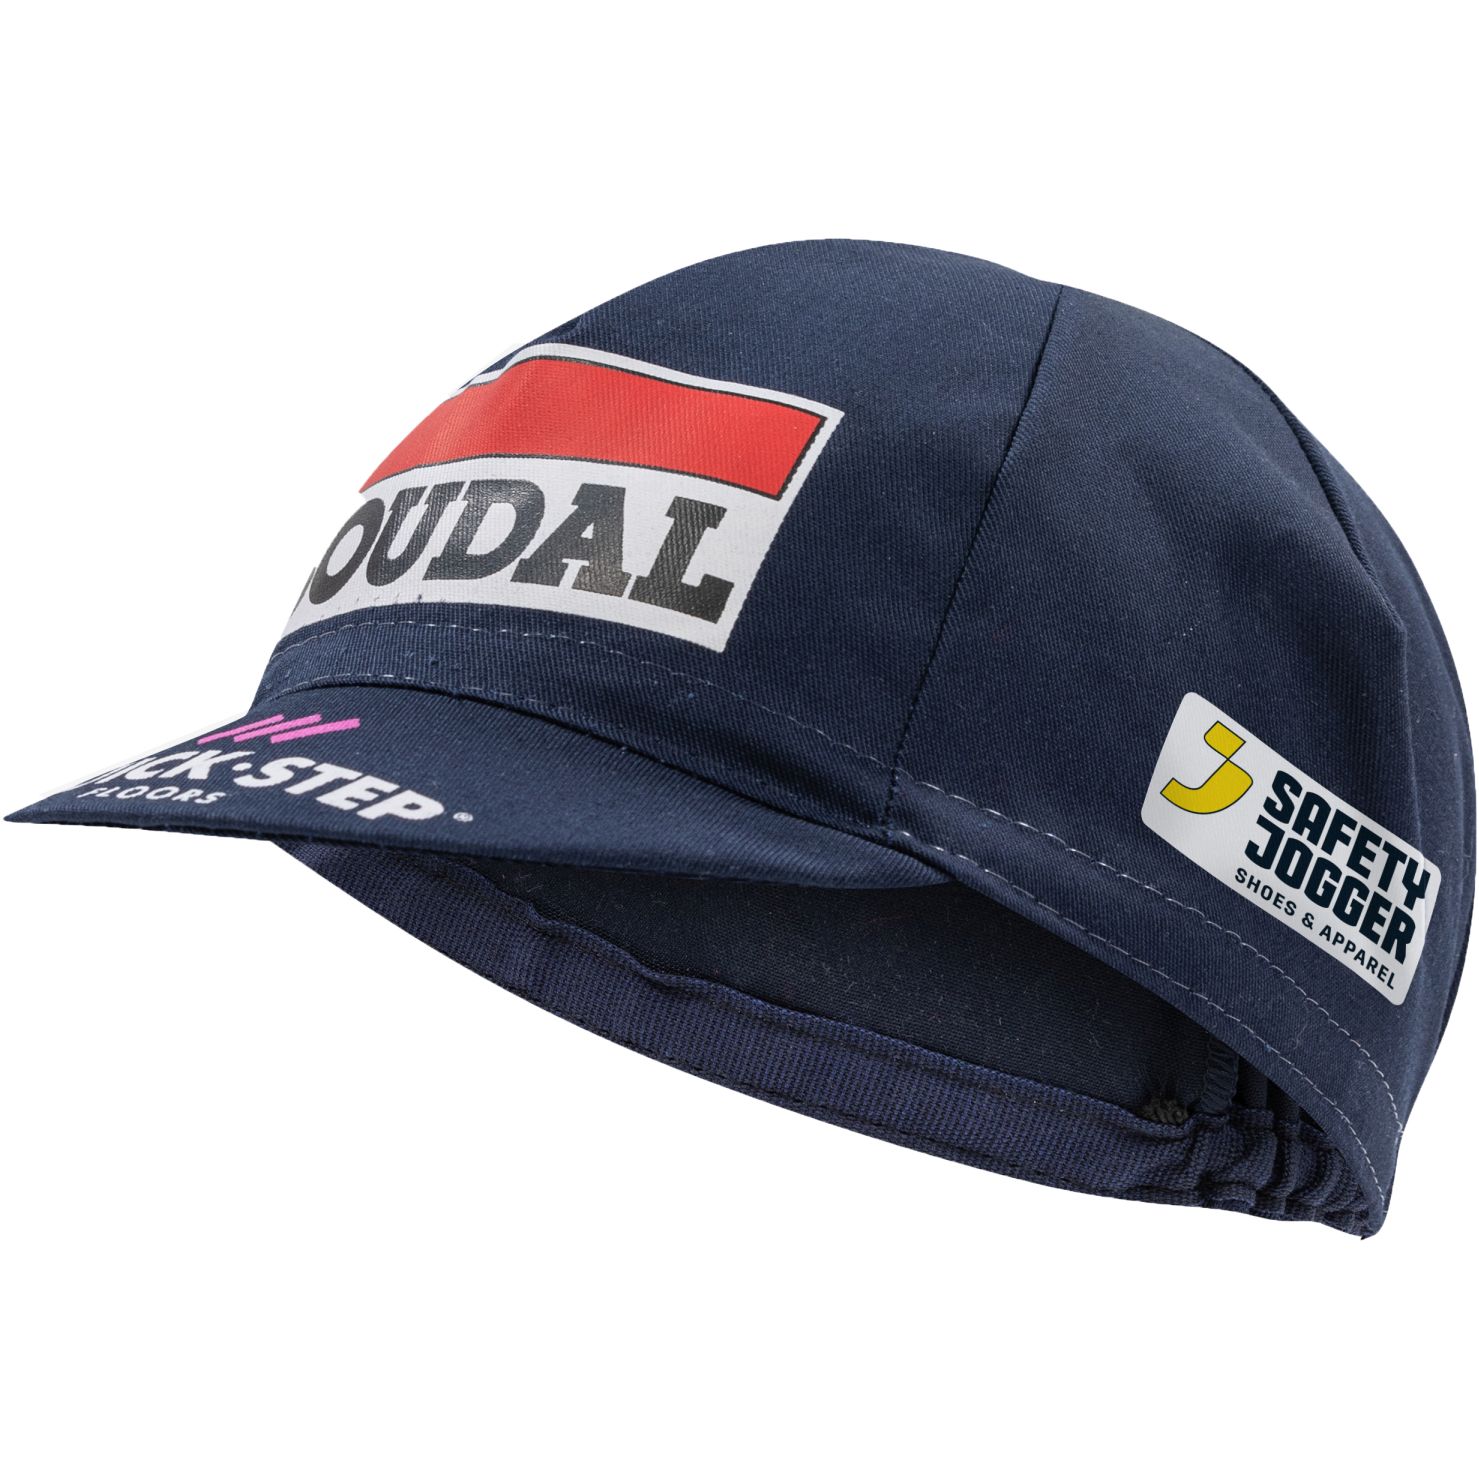 Picture of Castelli Cycling Cap Team Soudal Quick-Step - belgian blue 424